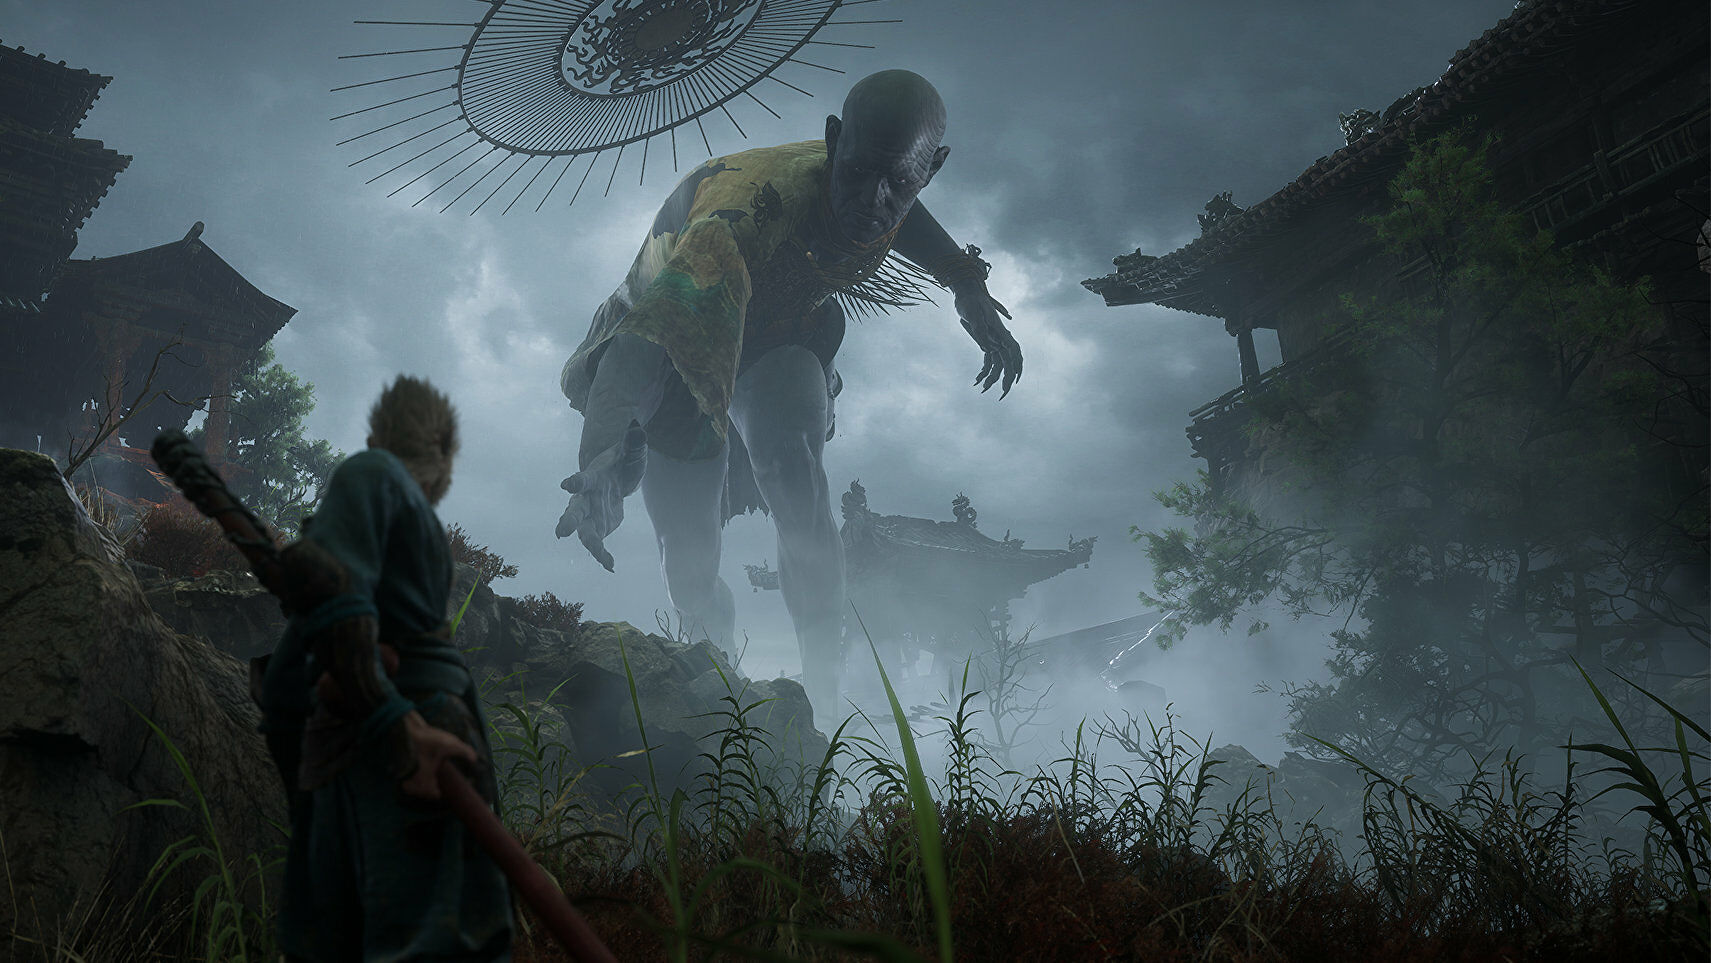 Black Myth: Wukong’s latest trailer shows no combat but is still gorgeous